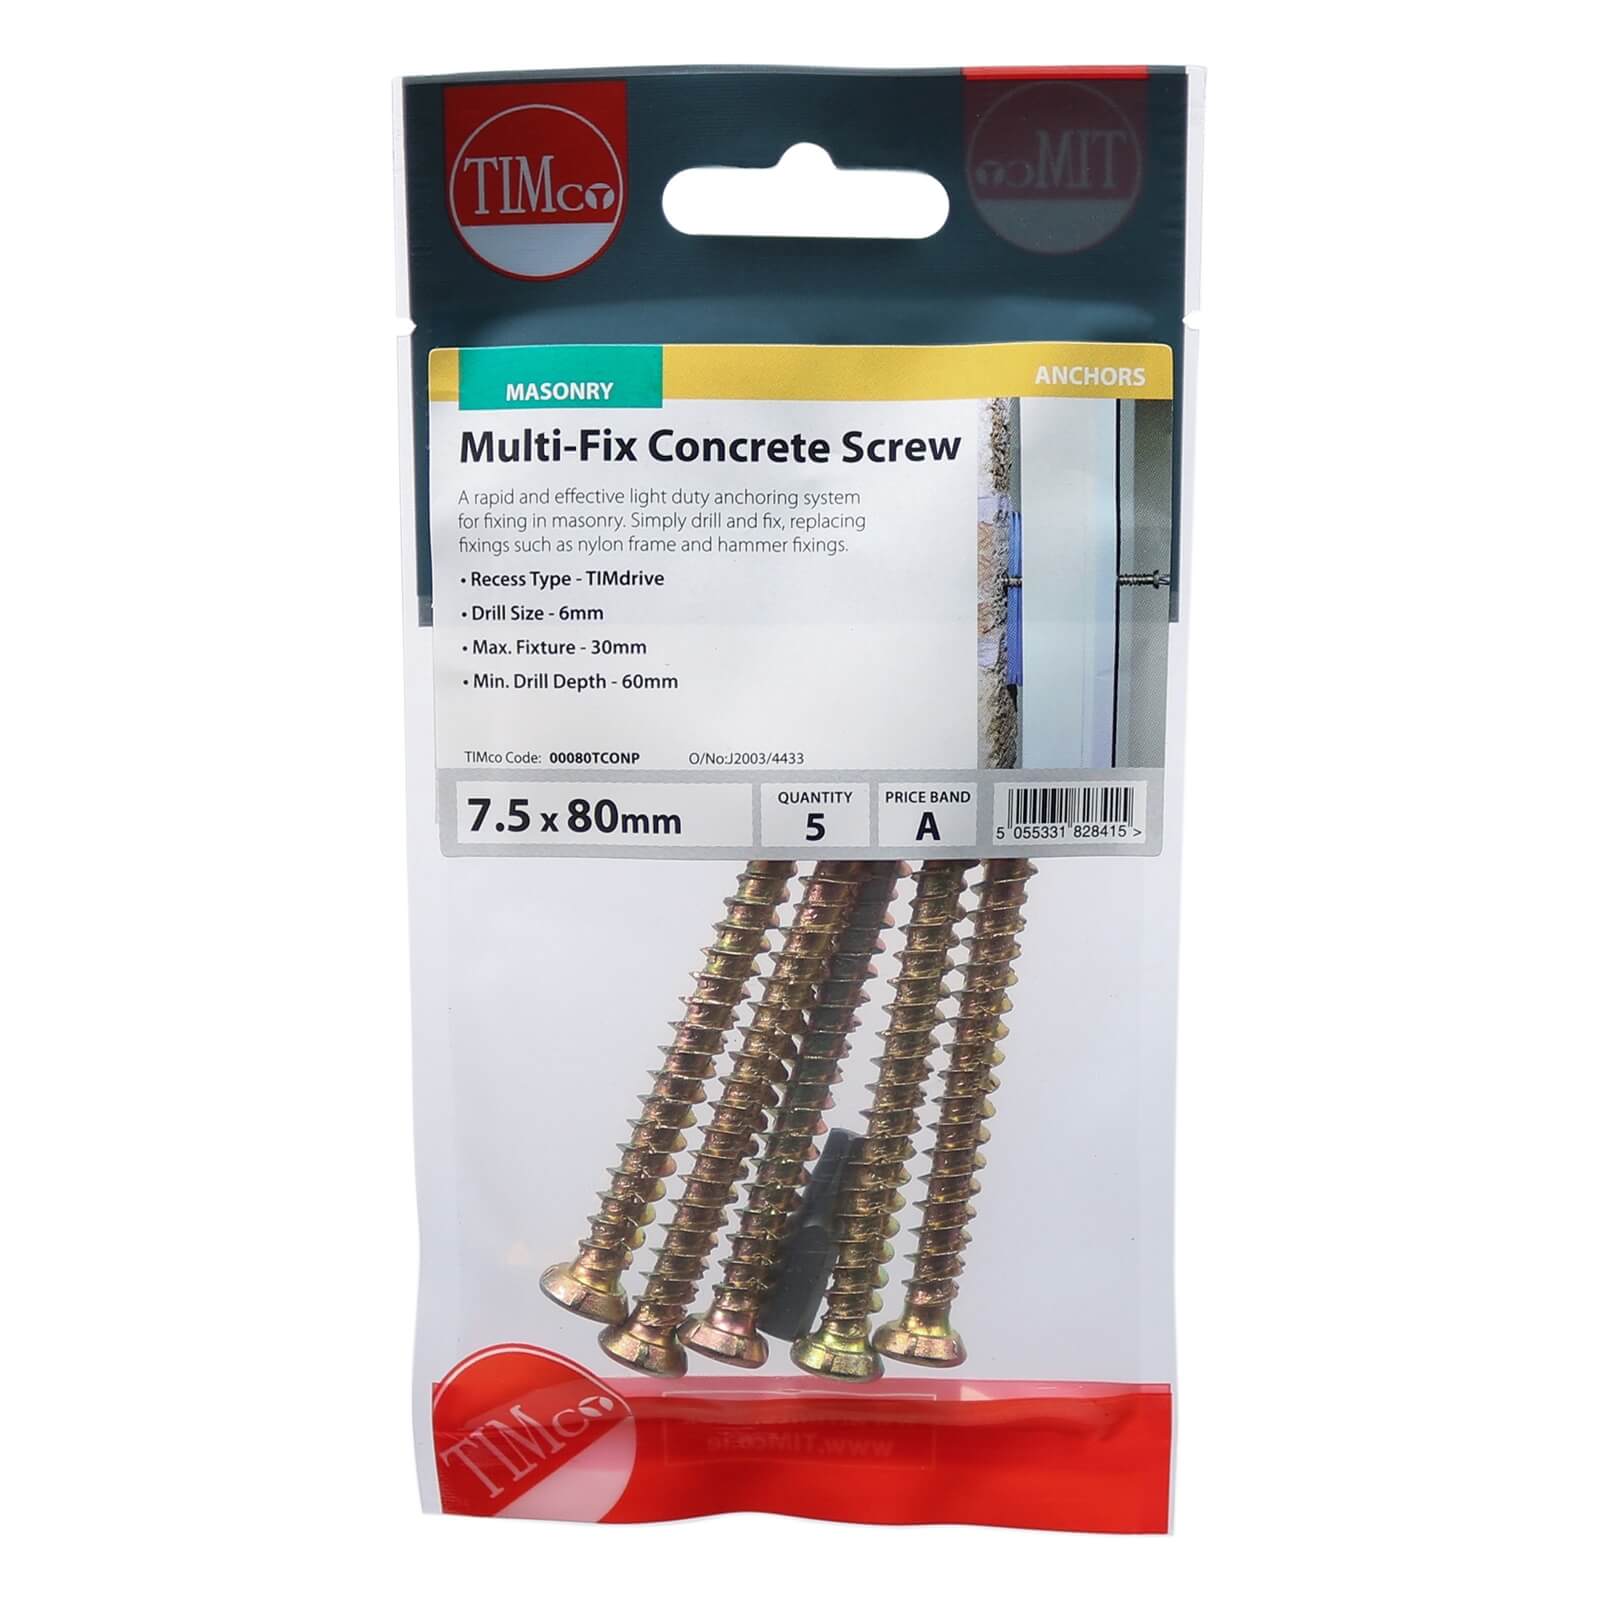 Concrete Screw Zyp 7.5mm x 80mm - Pack of 5